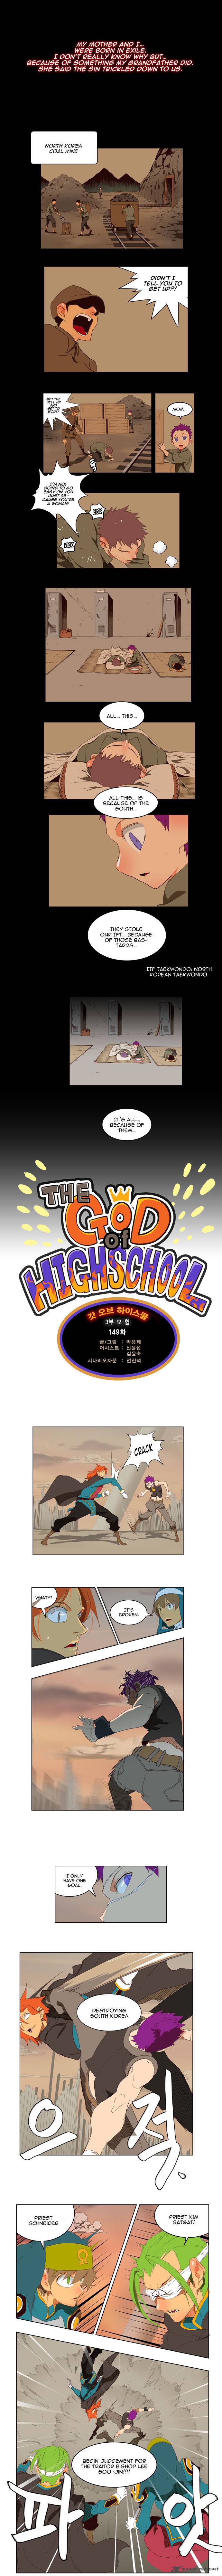 The God Of High School Chapter 149 Page 2